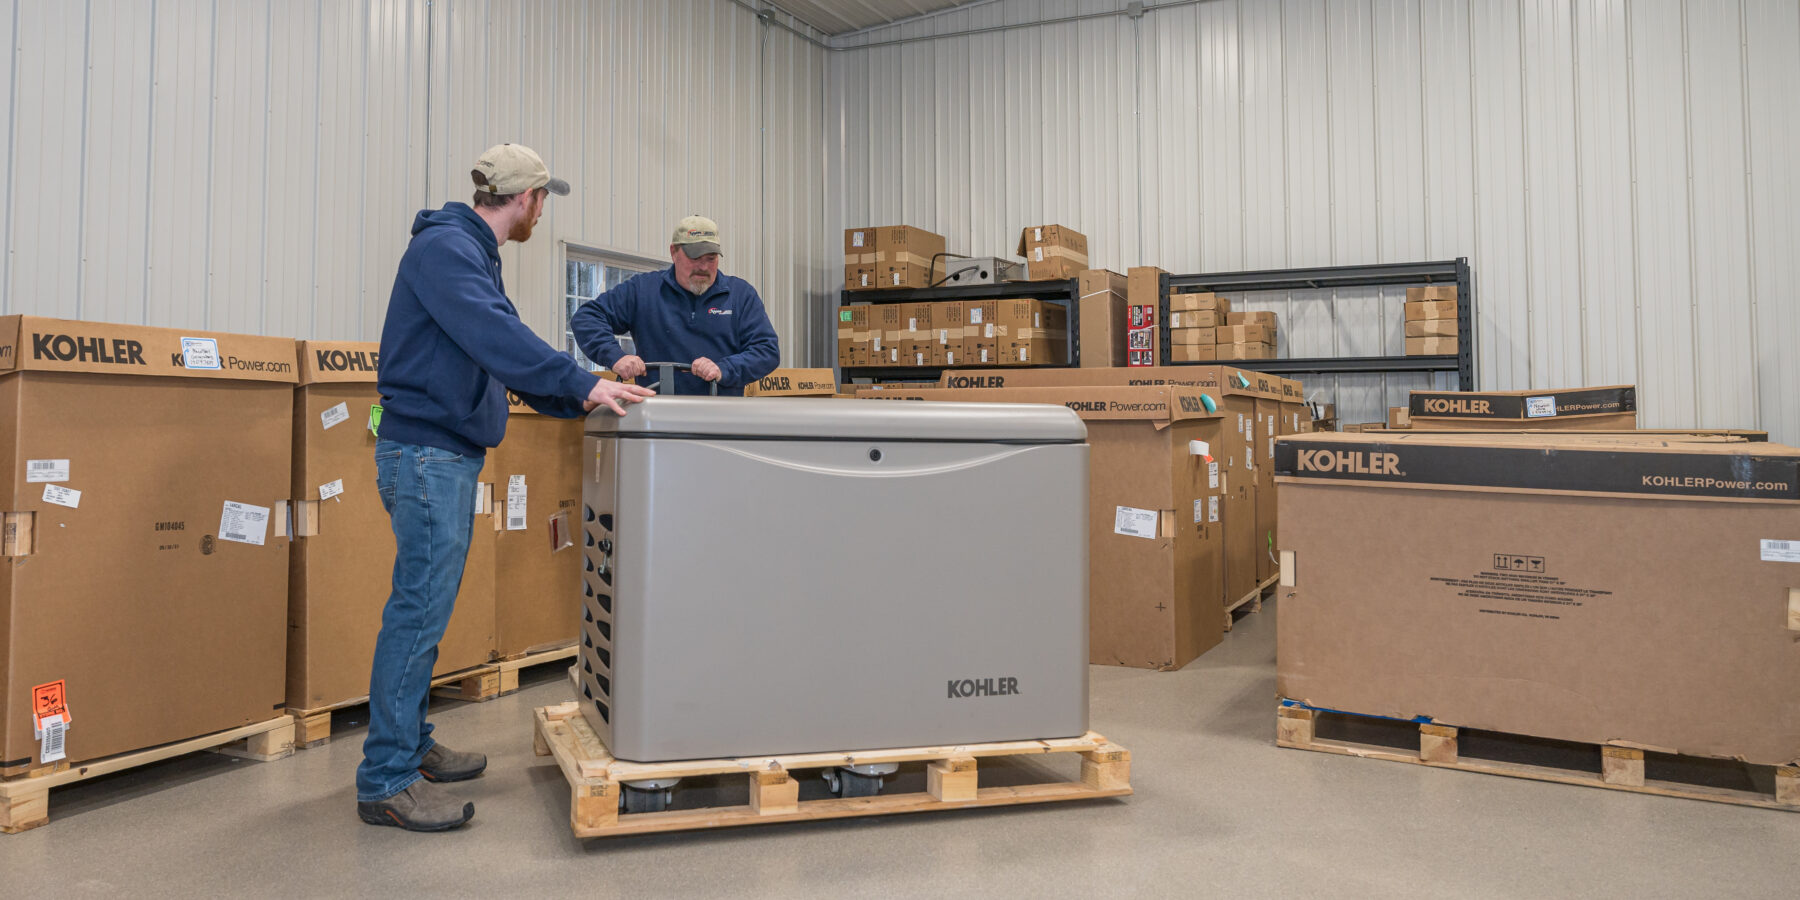 Moving a Kohler generator in the warehouse